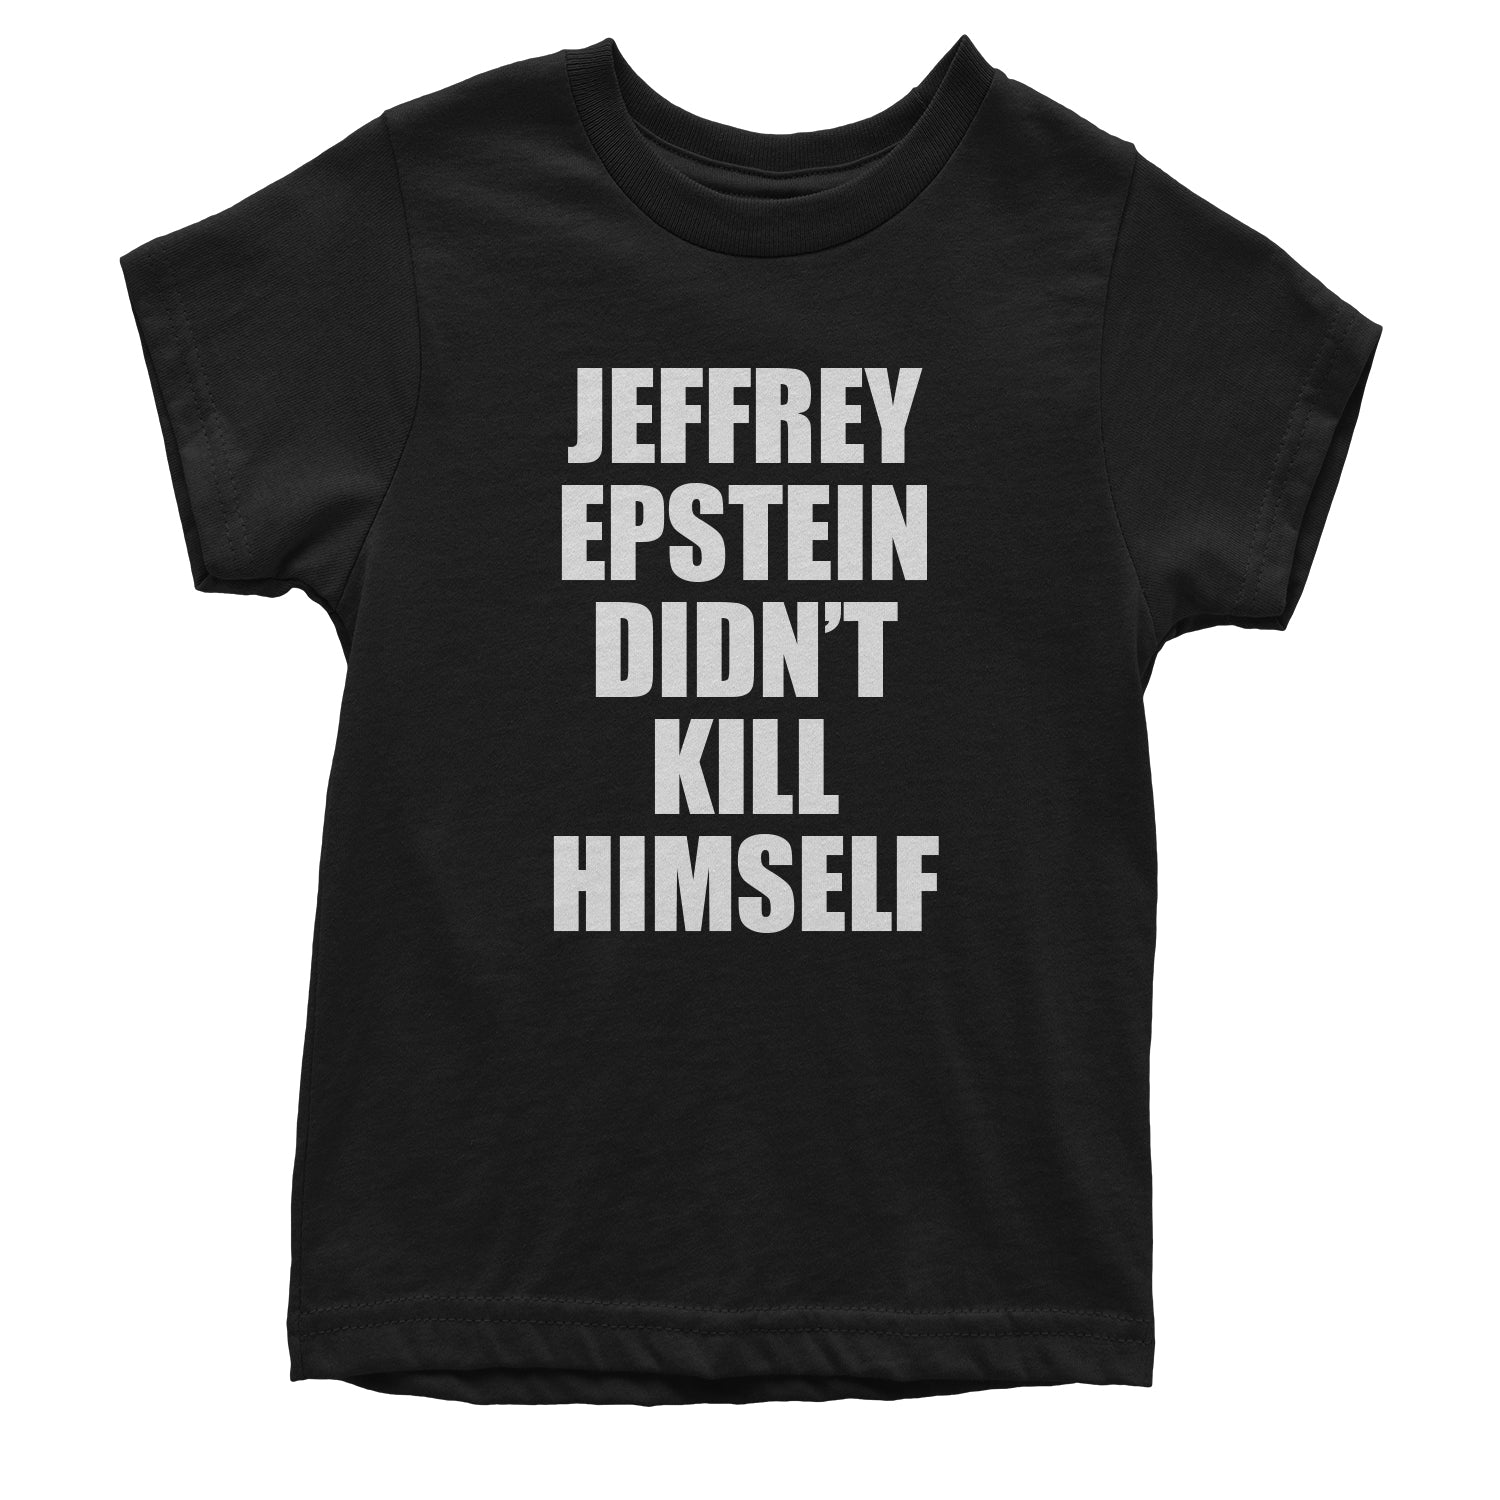 Jeffrey Epstein Didn't Kill Himself Youth T-shirt coverup, homicide, murder, ssadgk, trump by Expression Tees